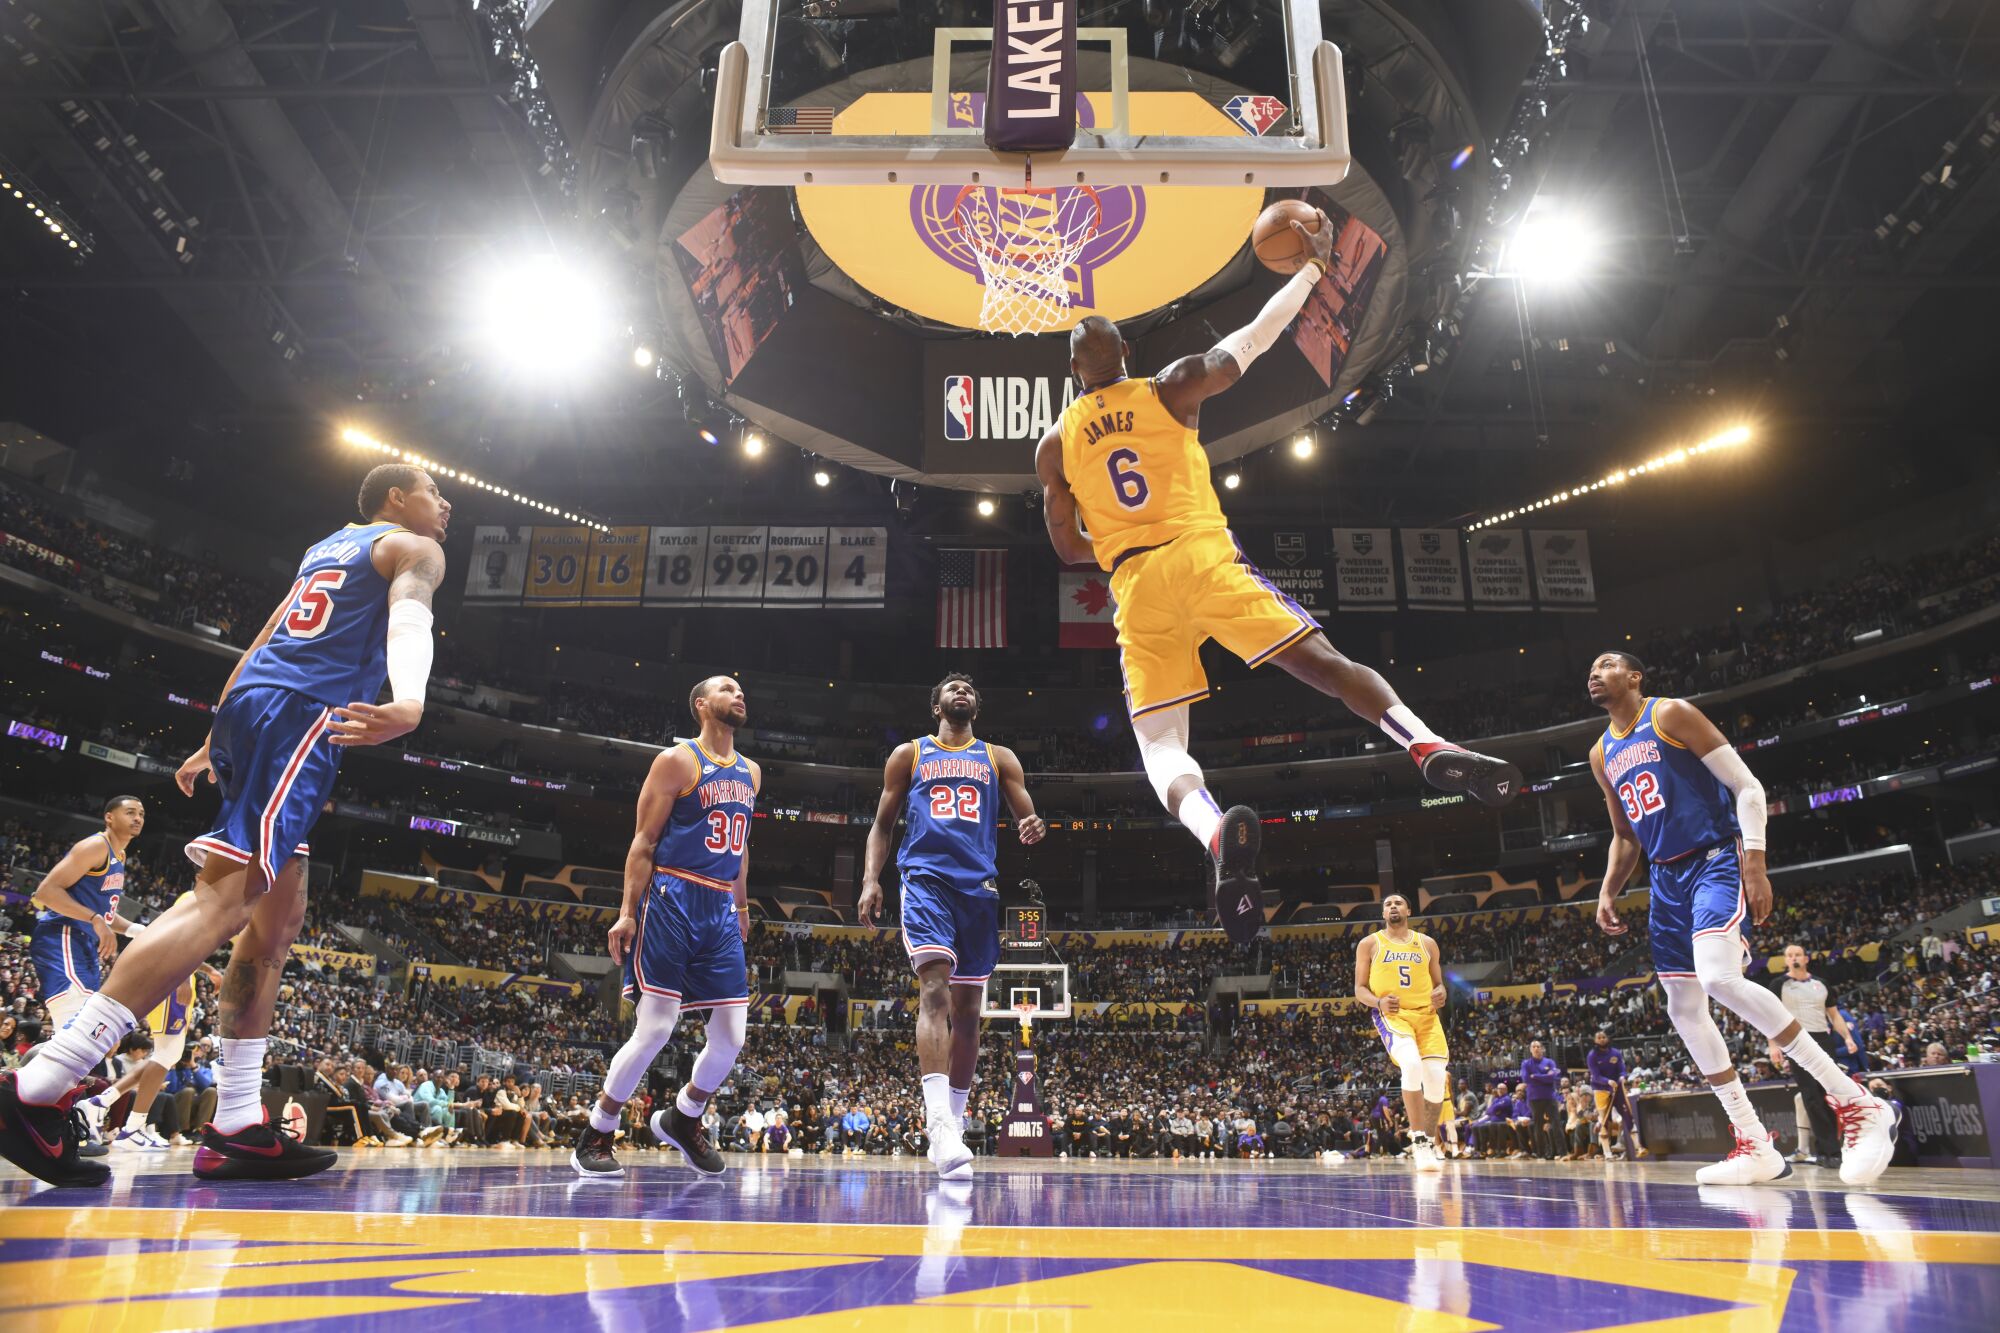 A different angle of Lakers forward LeBron James throwing down his reverse dunk.